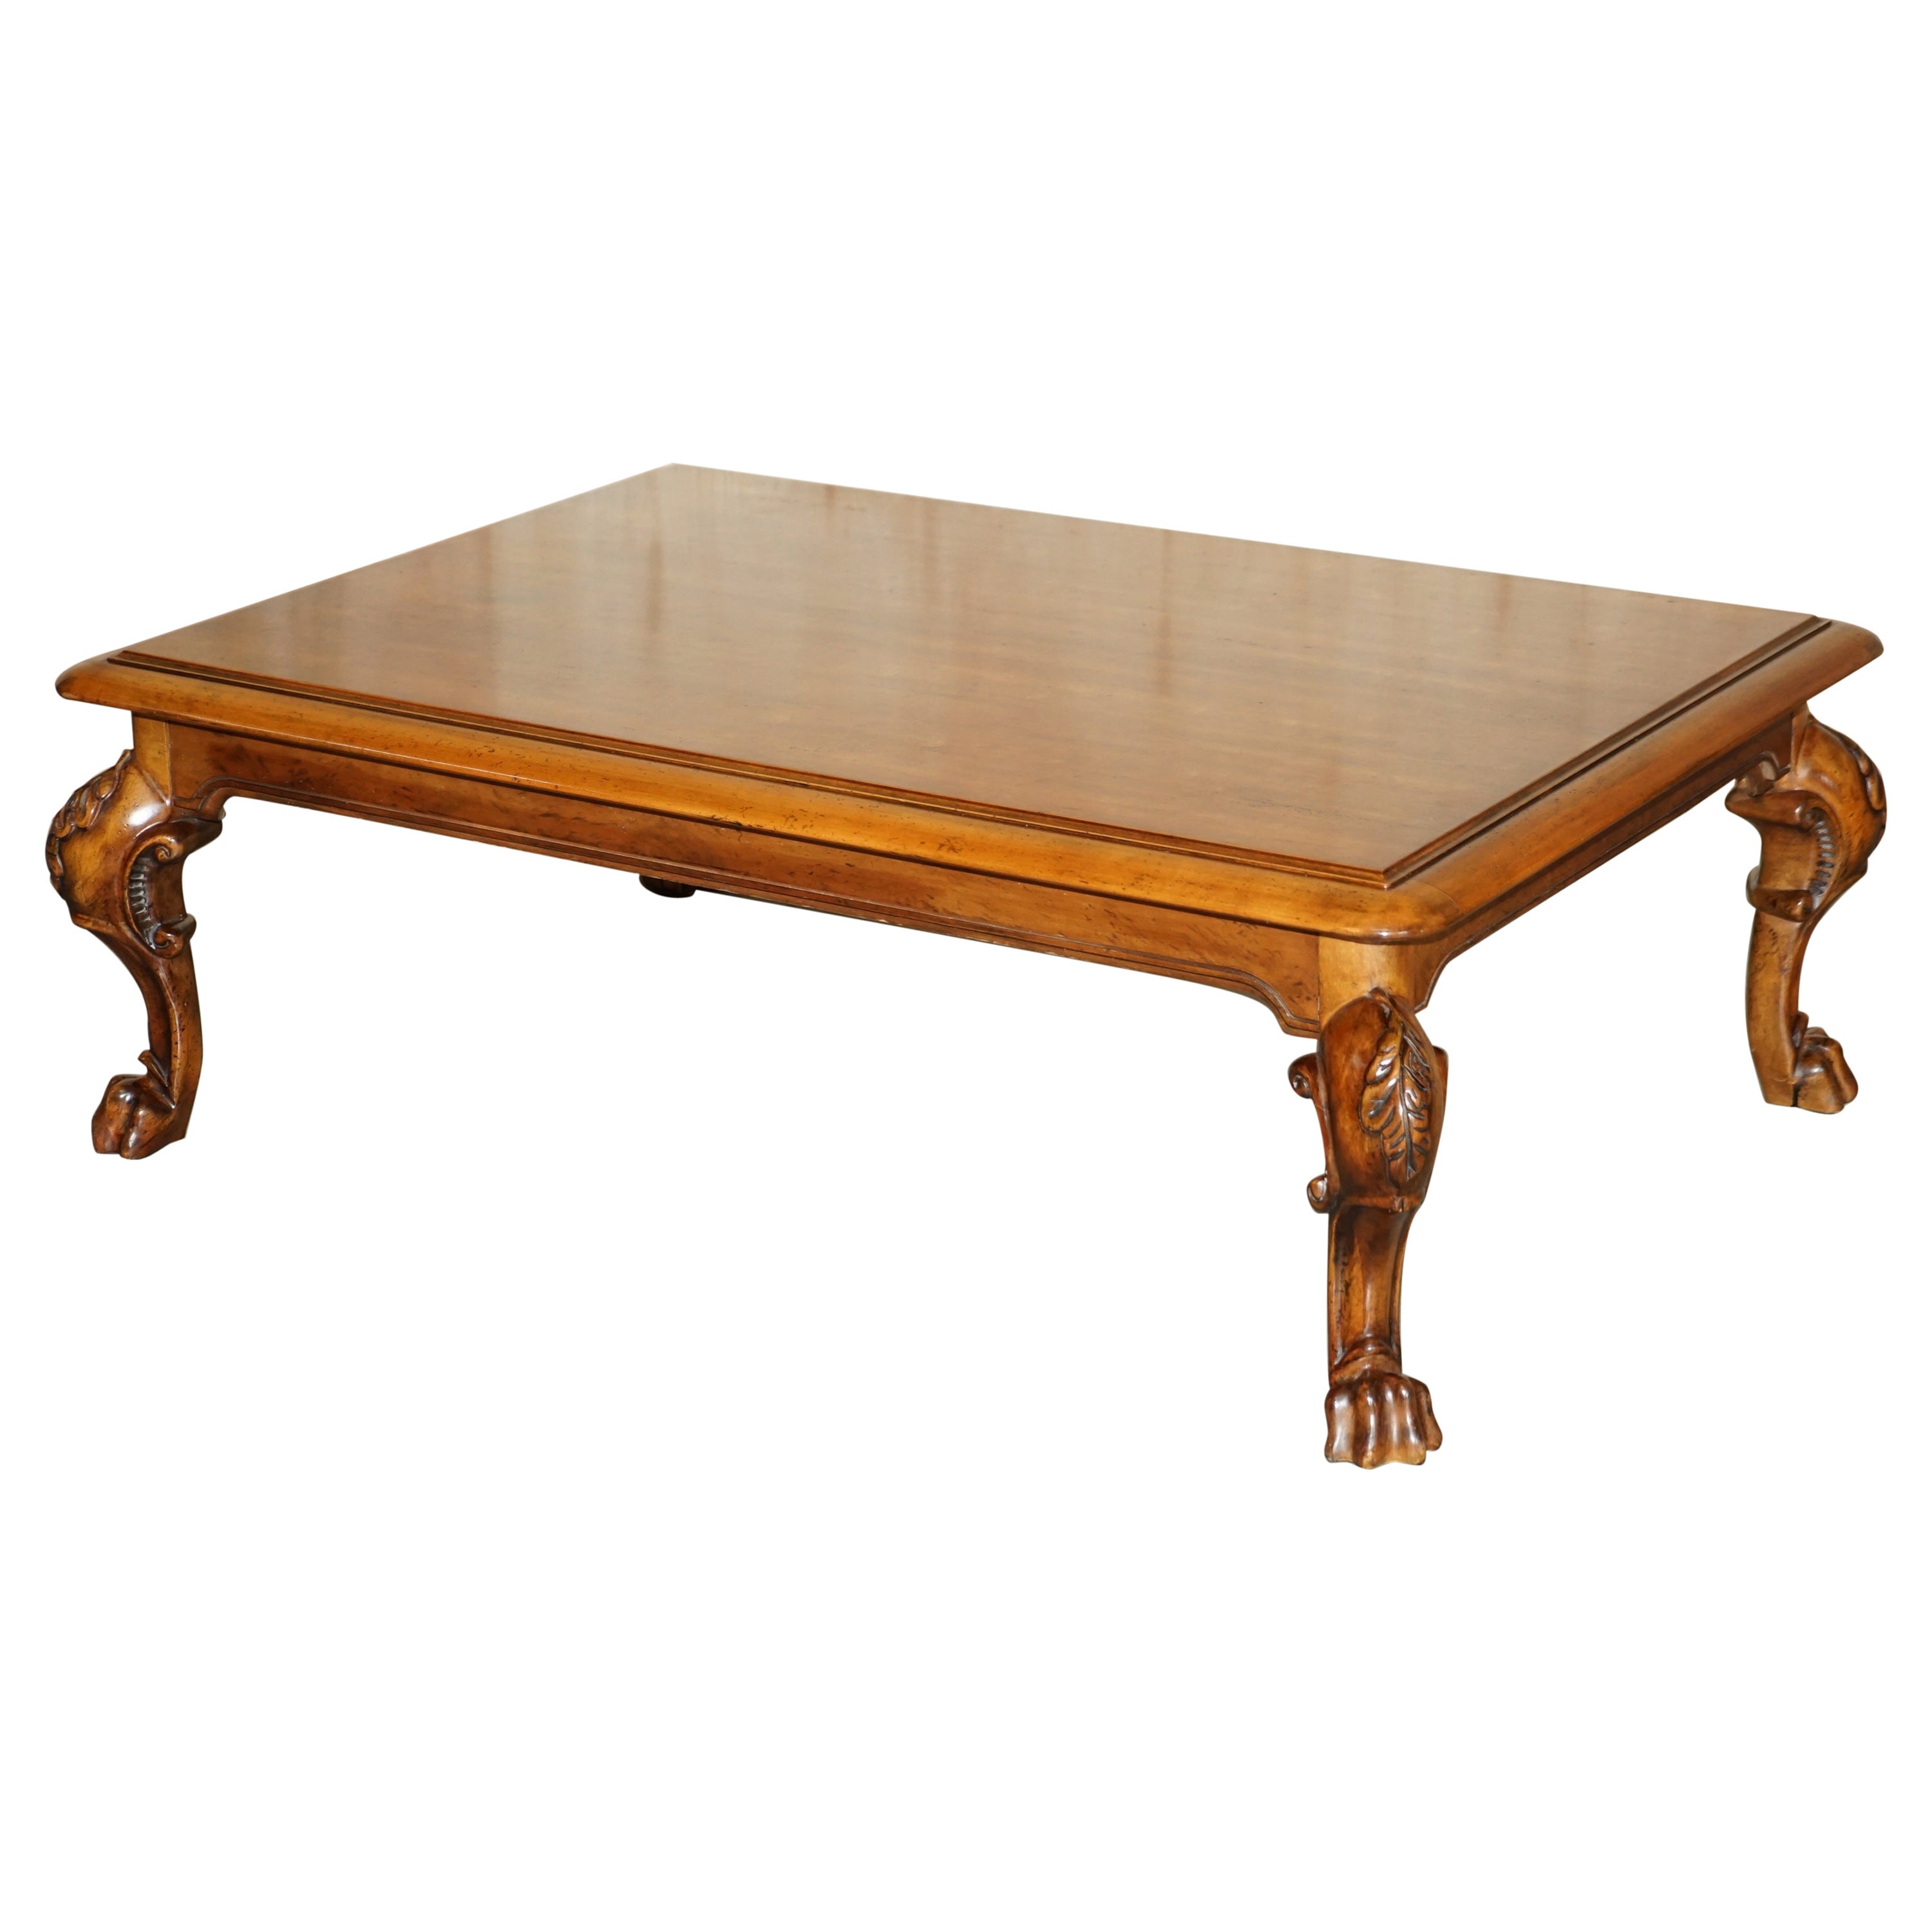 Stunning Large Ralph Lauren American Walnut Carved Wood Coffee Cocktail Table